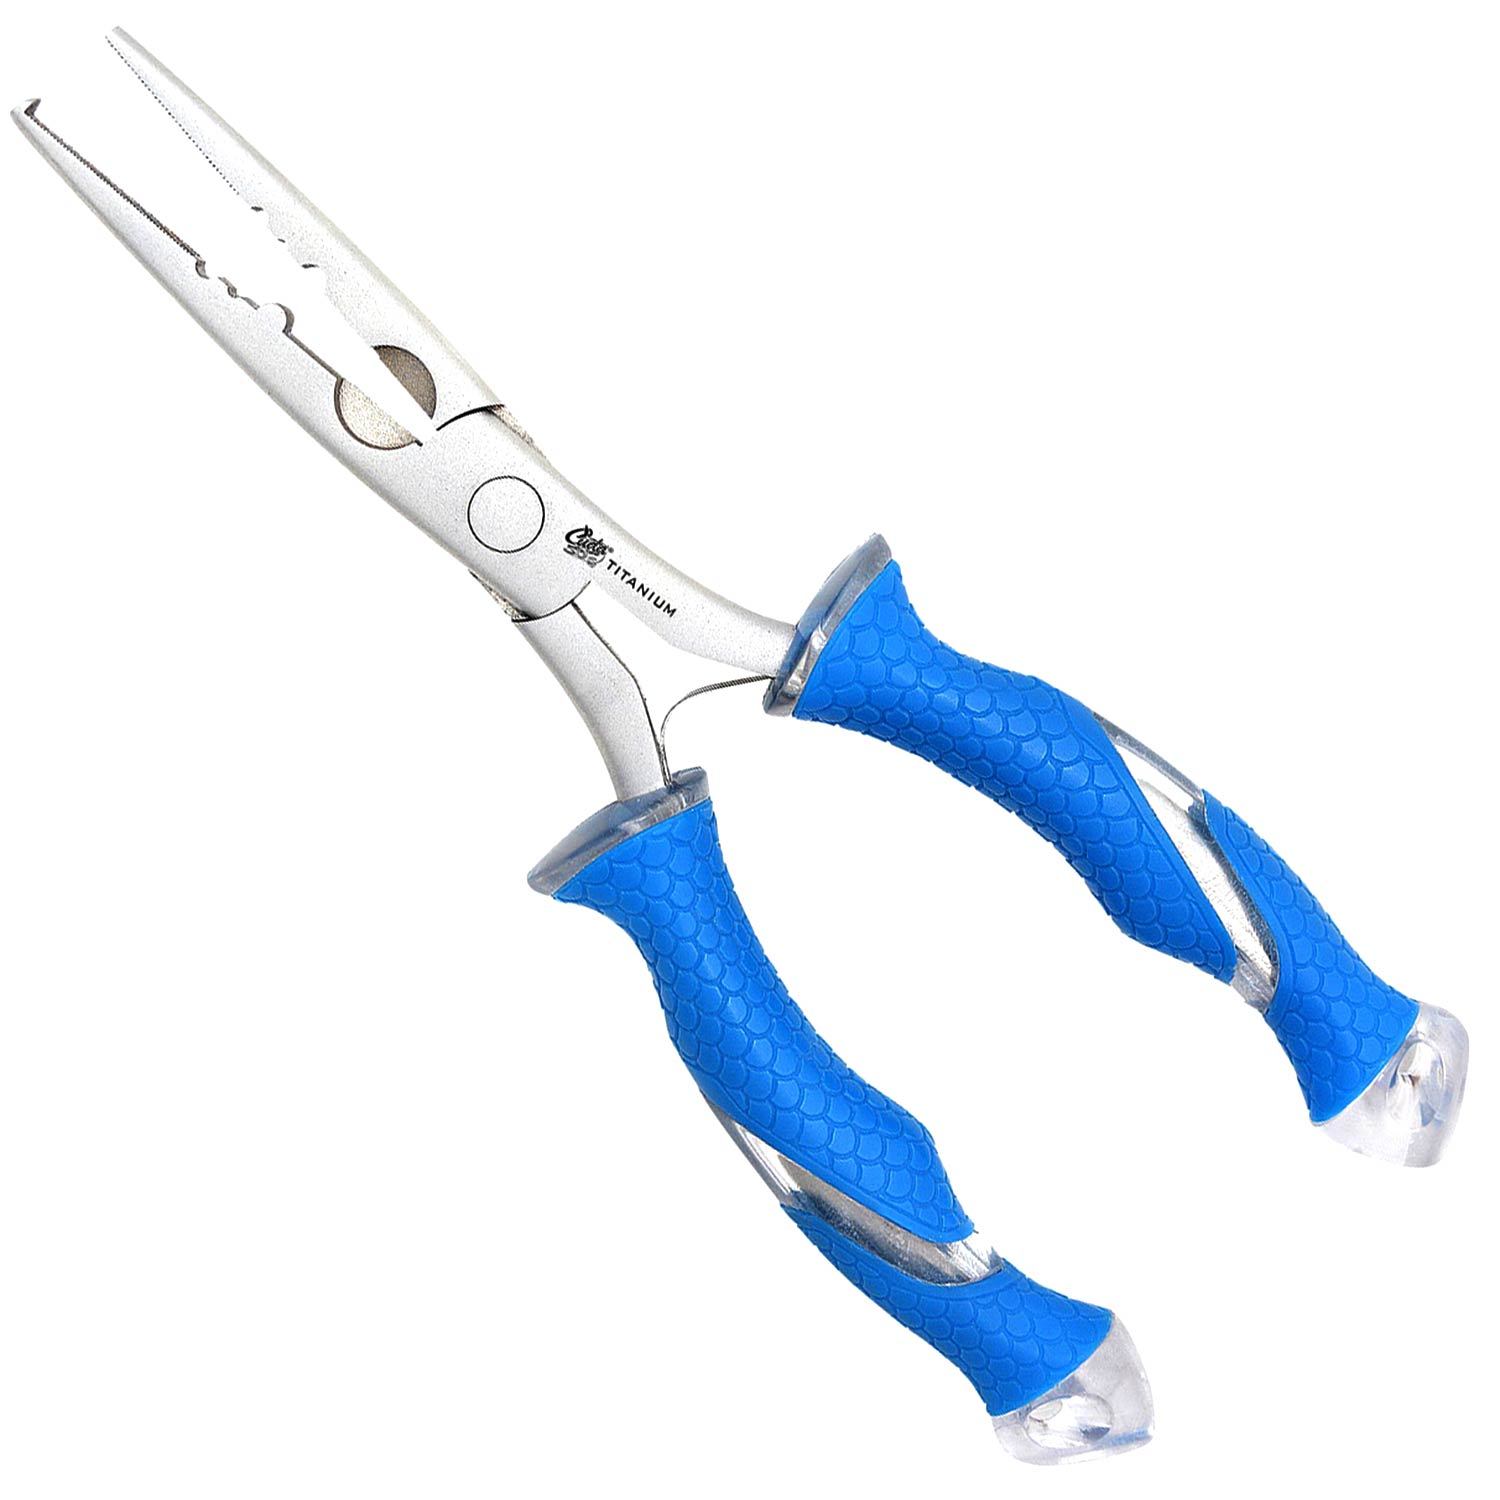 Fishing Gear Clearance Multifunction Long Nose Fishing Pliers Stainless  Steel Fish Hook Pliers With Lanyard Profession Fishing Pliers For Fresh  Water